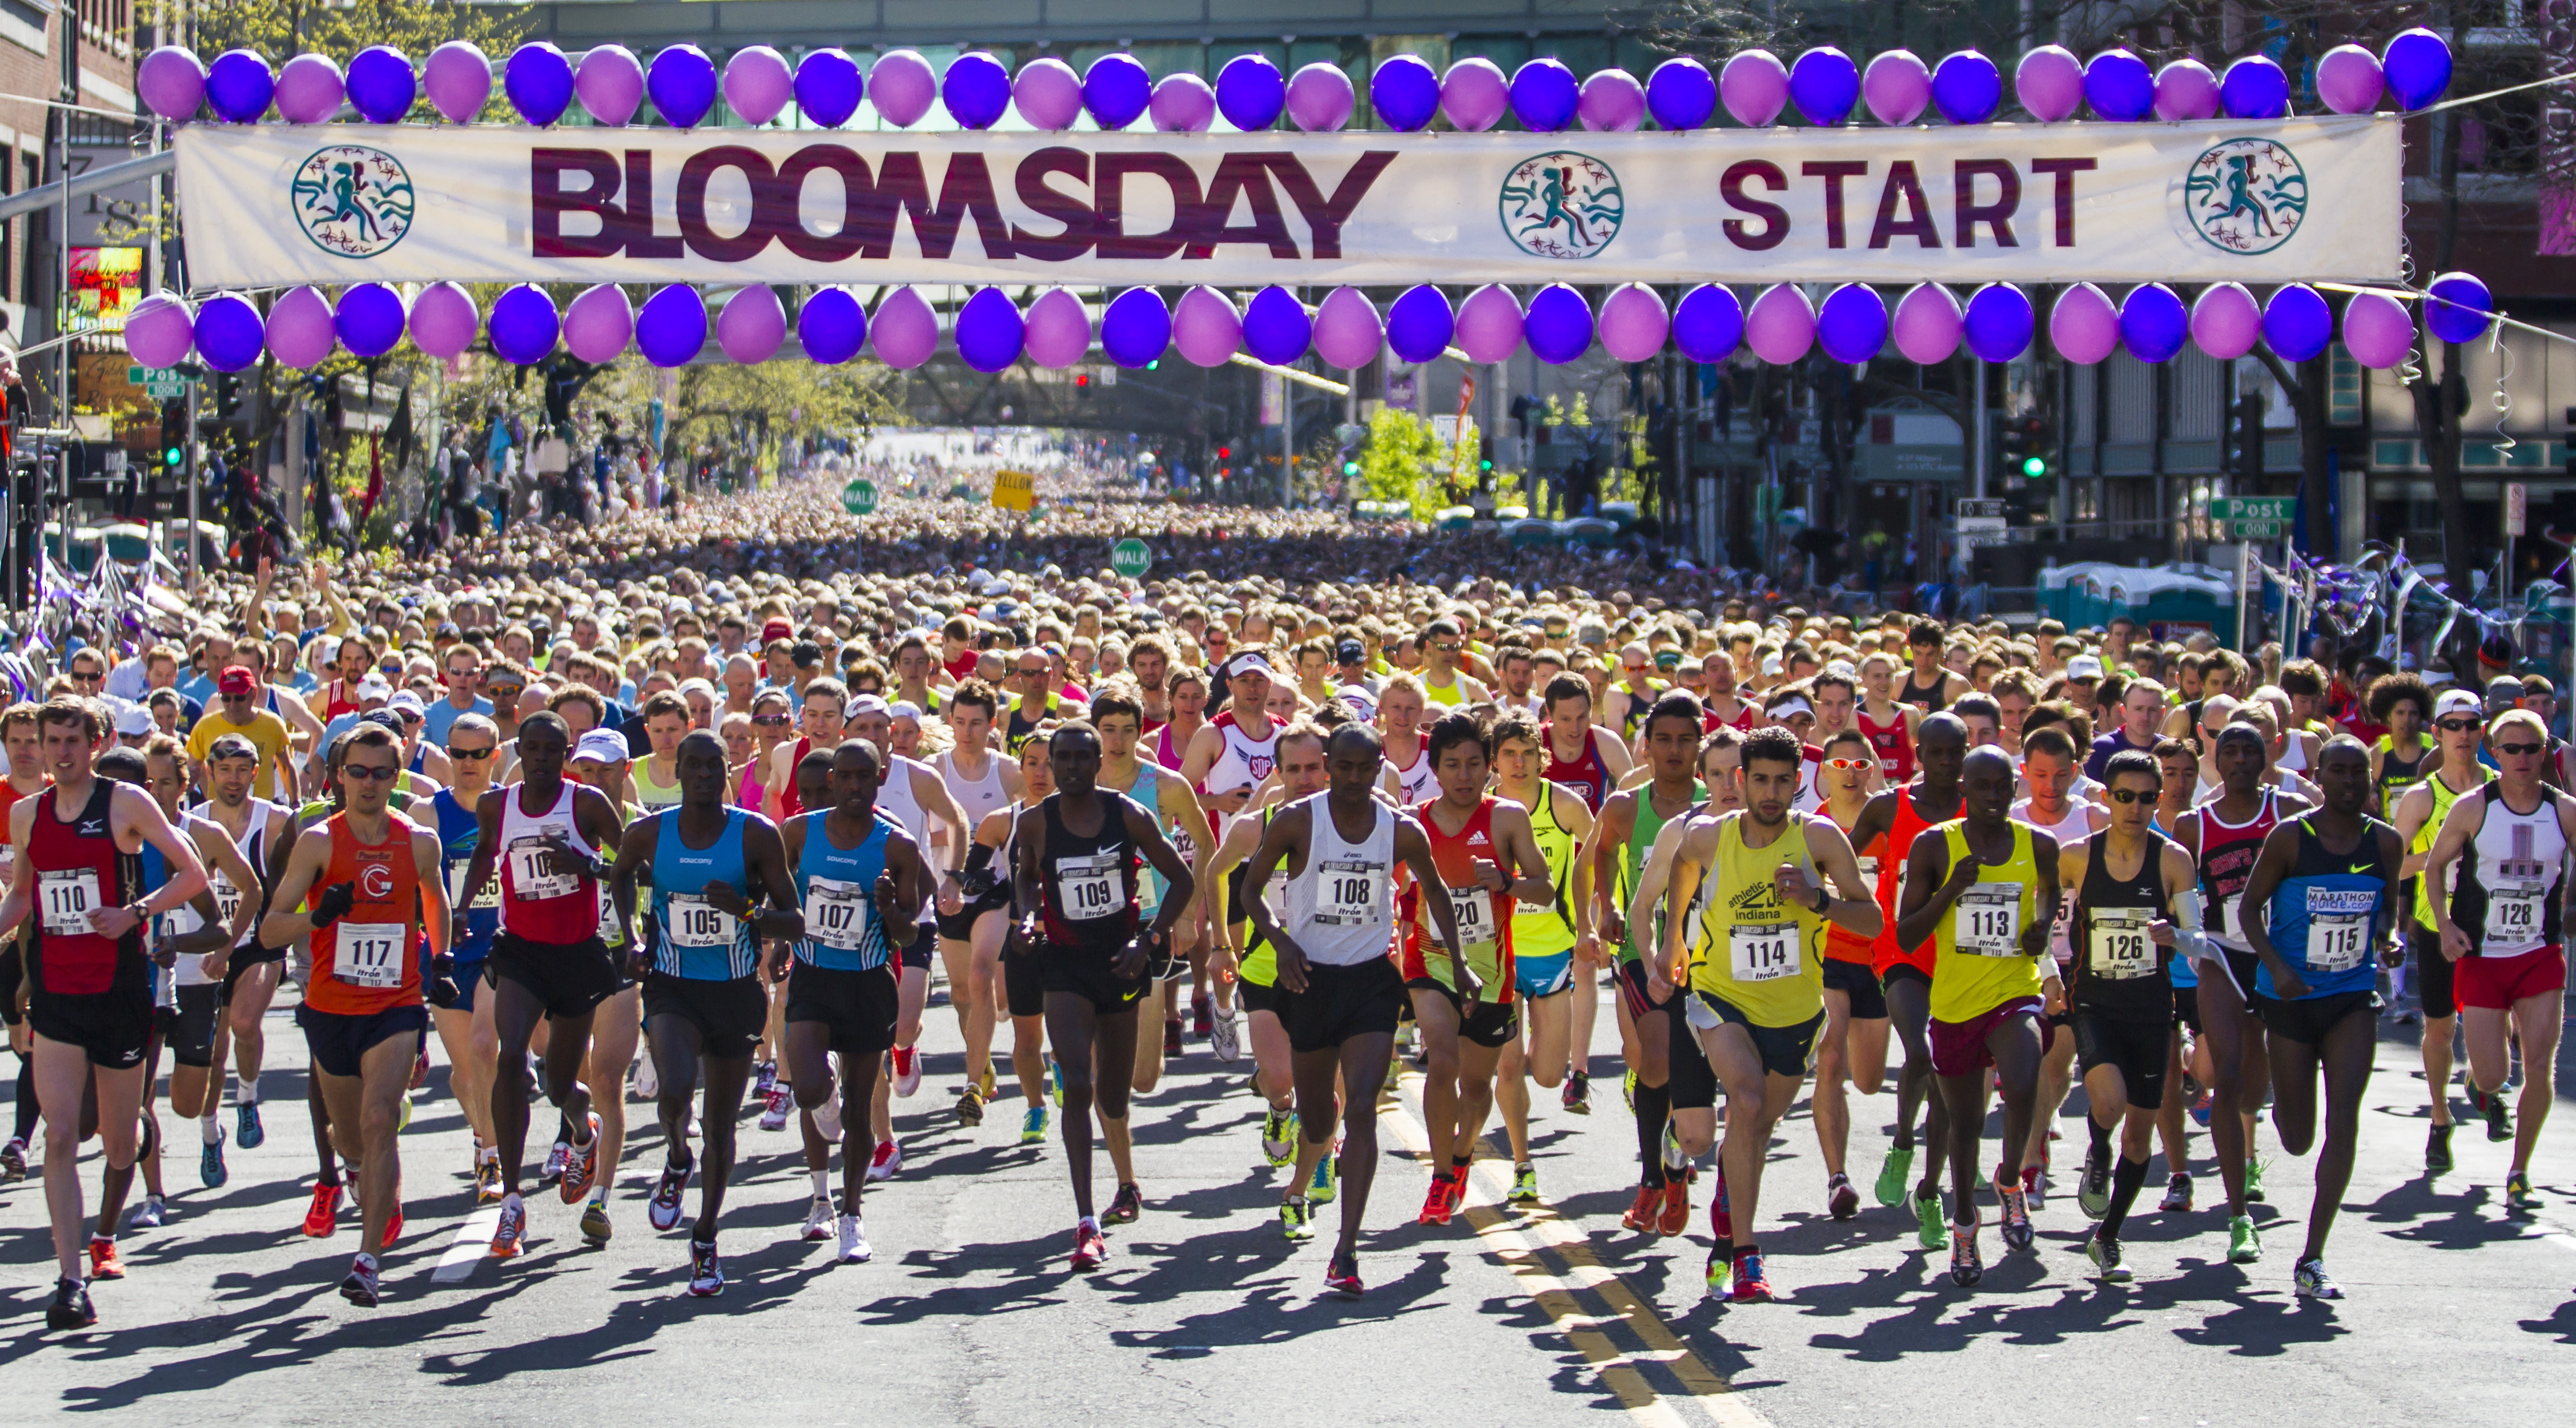 44th running of Lilac Bloomsday Run postponed to September 20th says